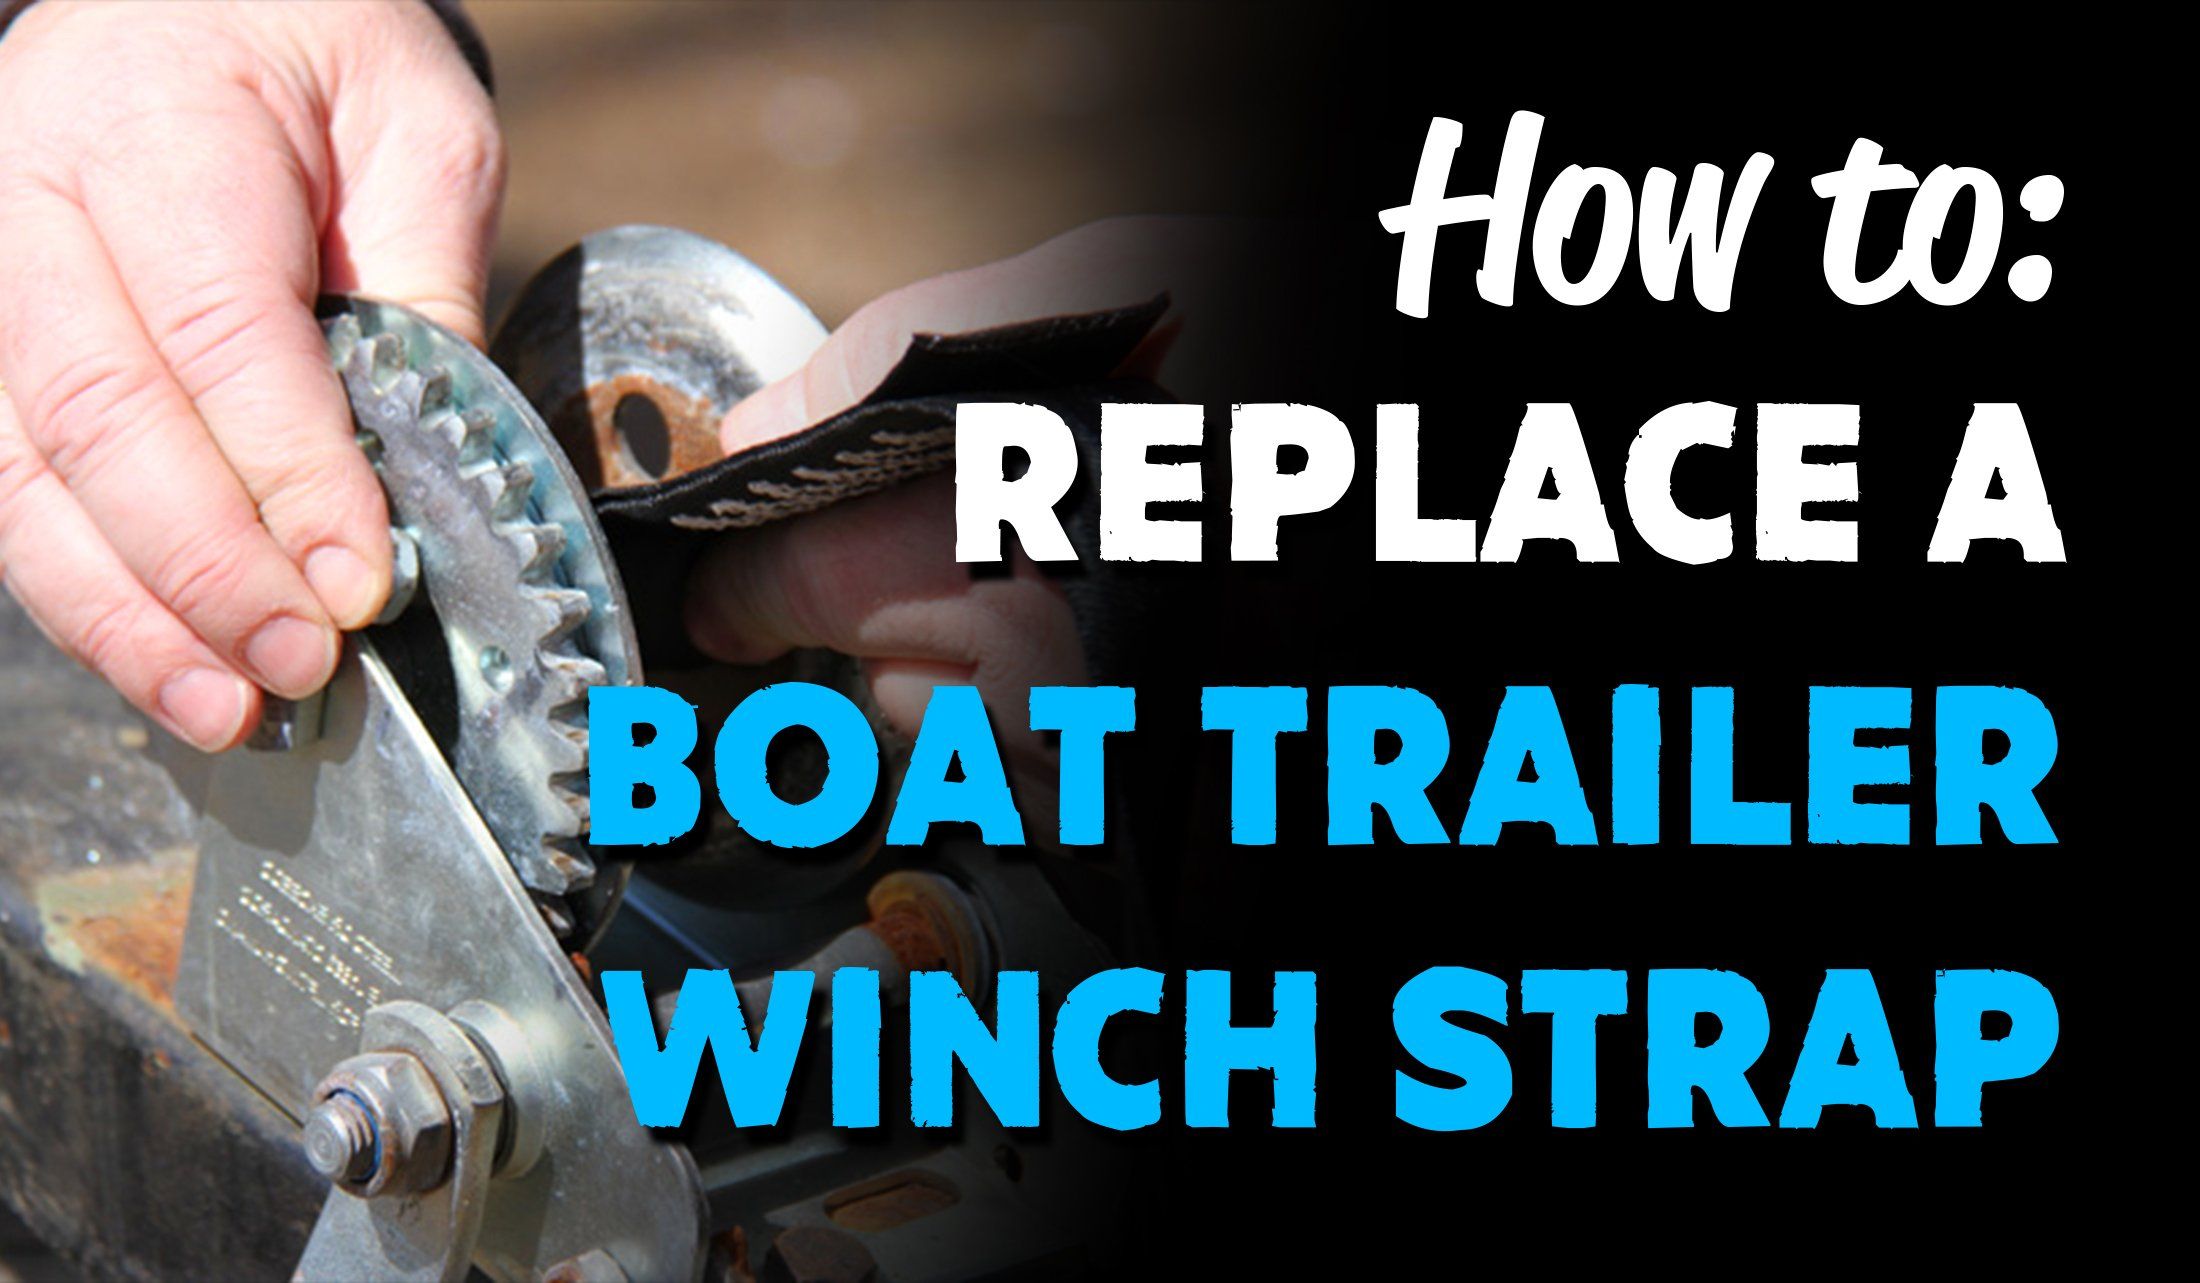 How to Replace a Boat Trailer Winch Strap like a Pro